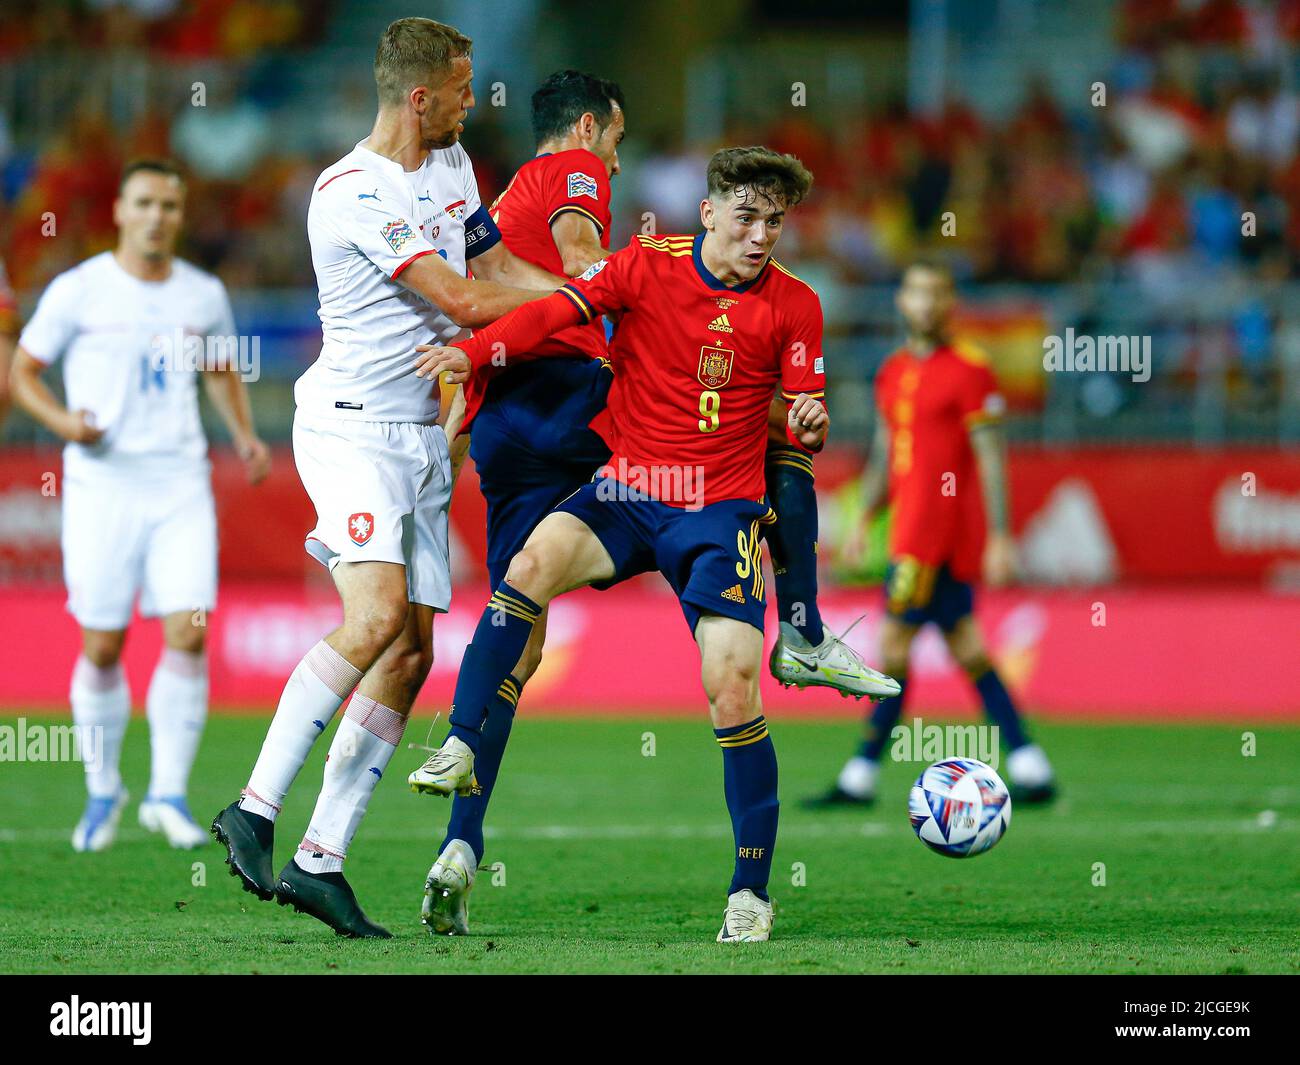 Pablo Martin Paez Gavira Gavi and Sergio Busquets of Spain and Tomas Soucek of Czech Republic during the UEFA Nations League match between Spain and Czech Republic played at La Rosaleda Stadium on June 12, 2022 in Malaga, Spain. (Photo by Antonio Pozo / PRESSINPHOTO) Stock Photo